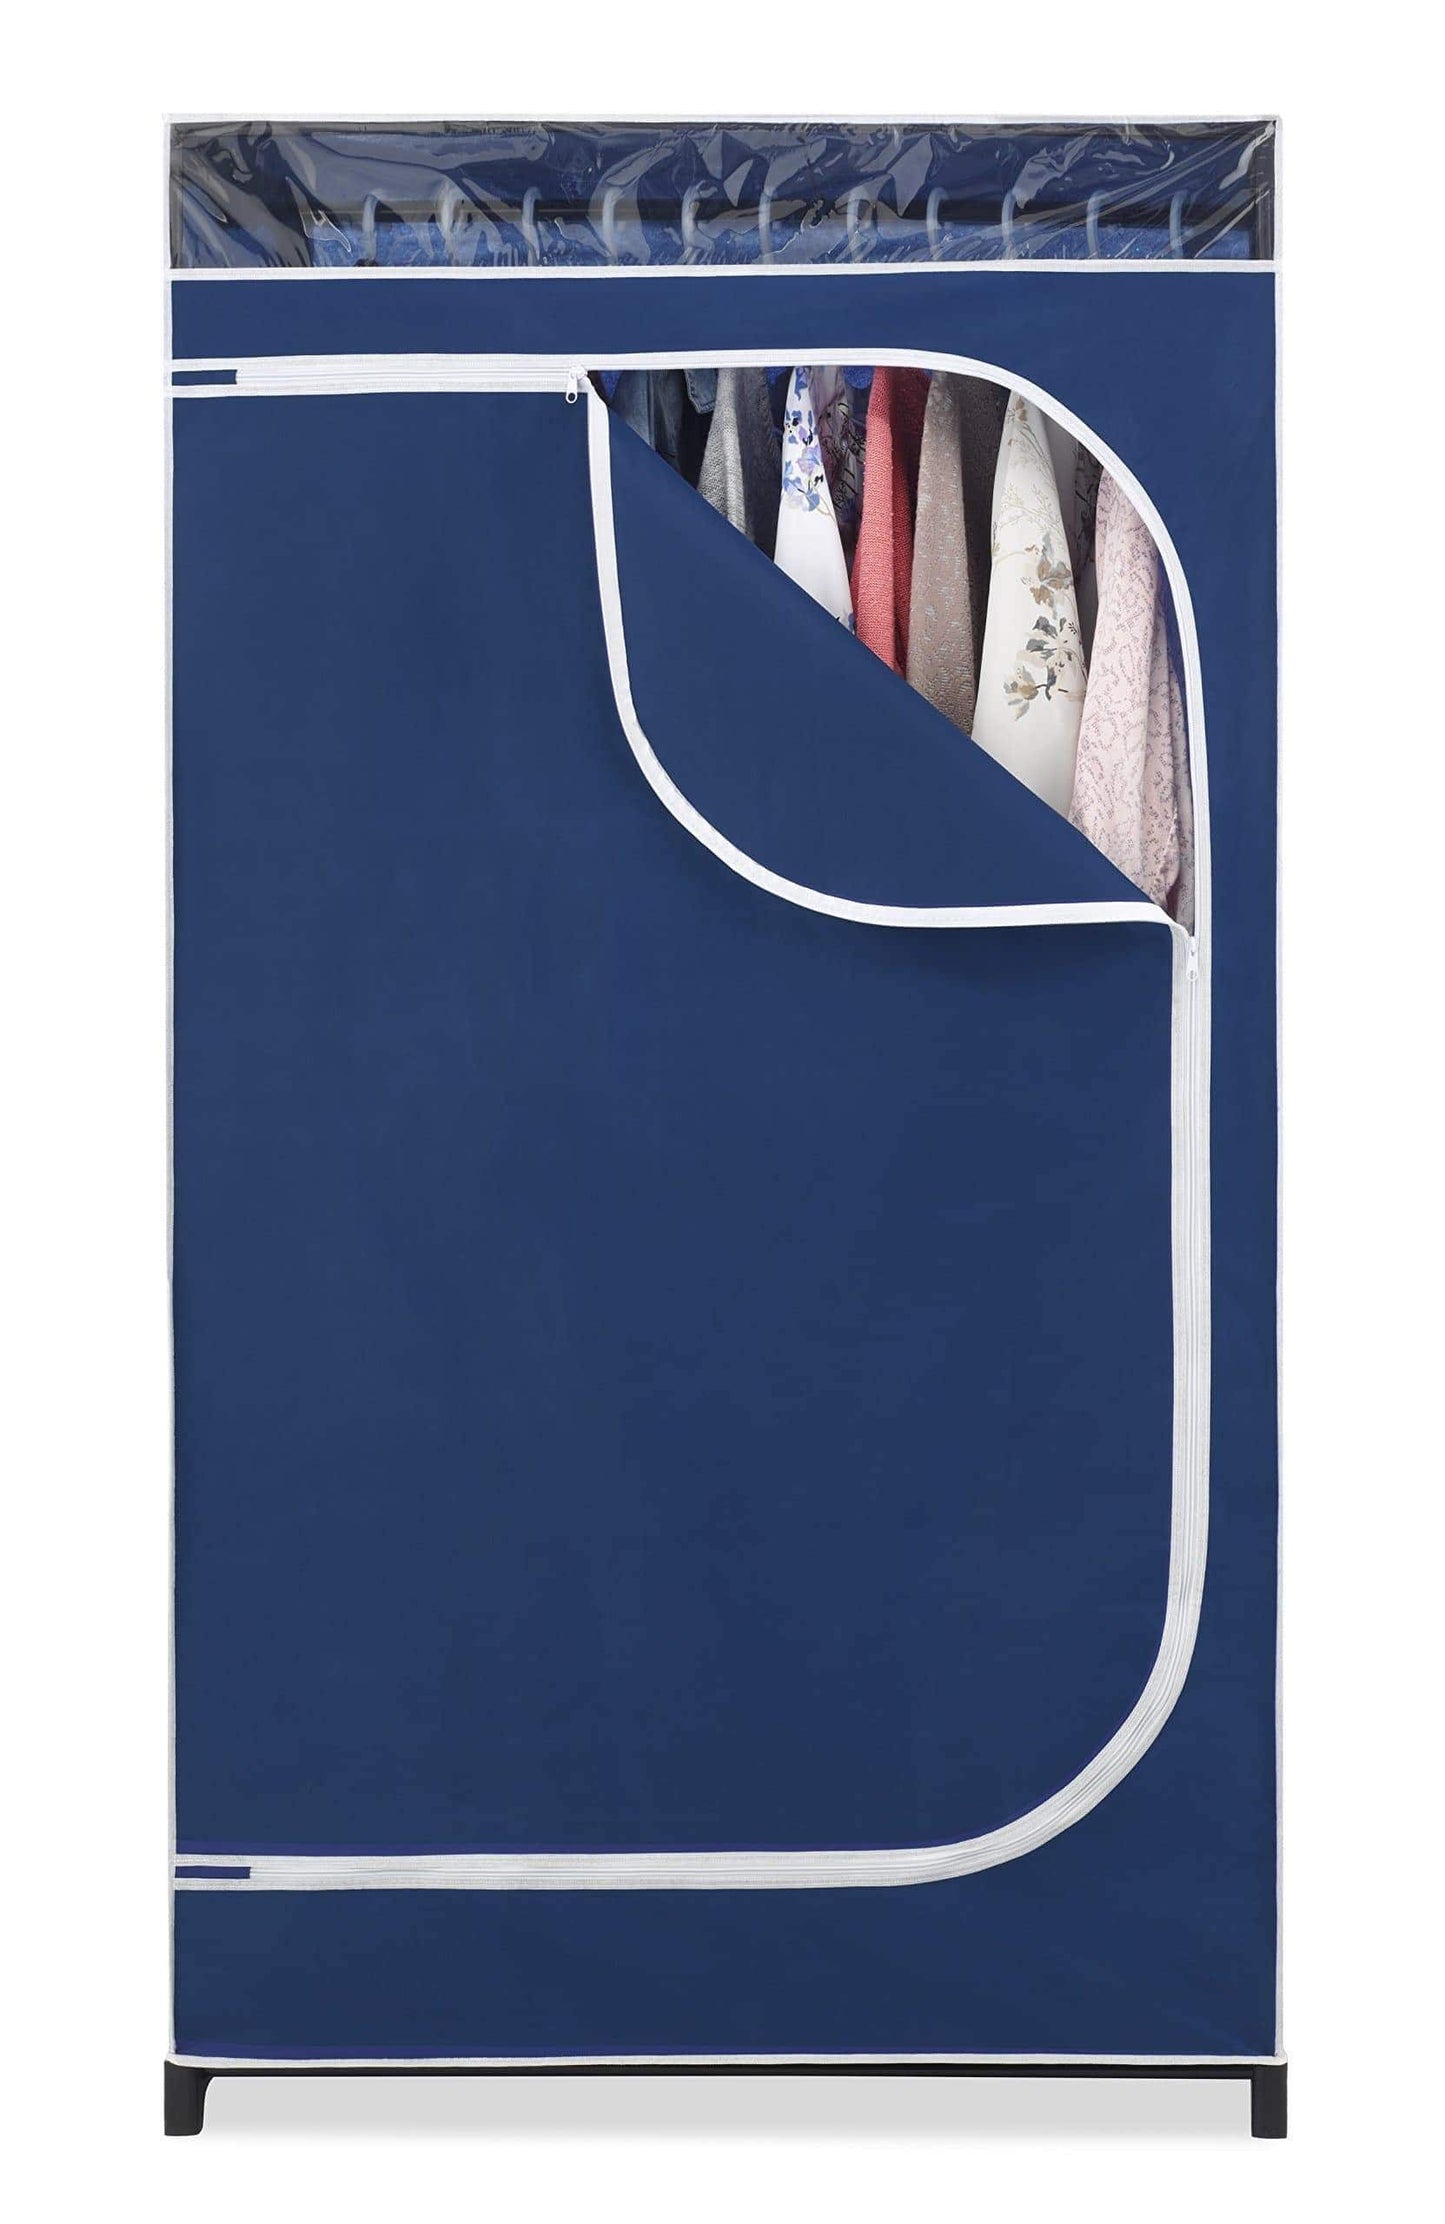 Select nice whitmor clothes closet freestanding garment organizer with sturdy fabric cover